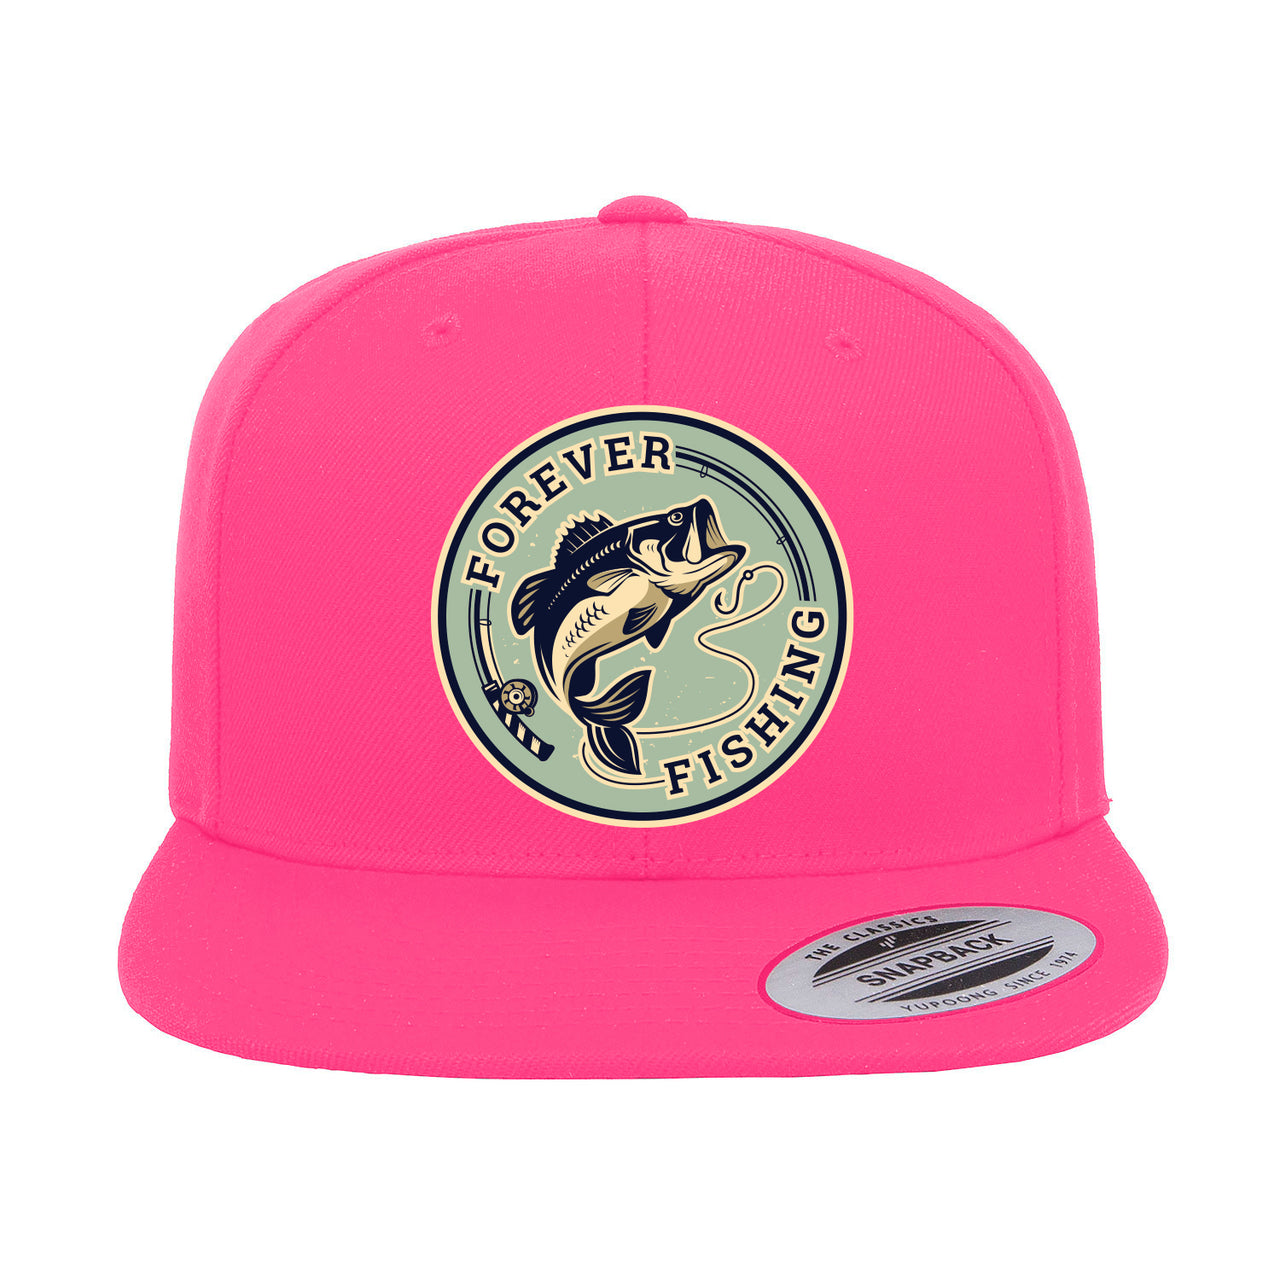 Forever Fishing Embroidered Flat Bill Cap